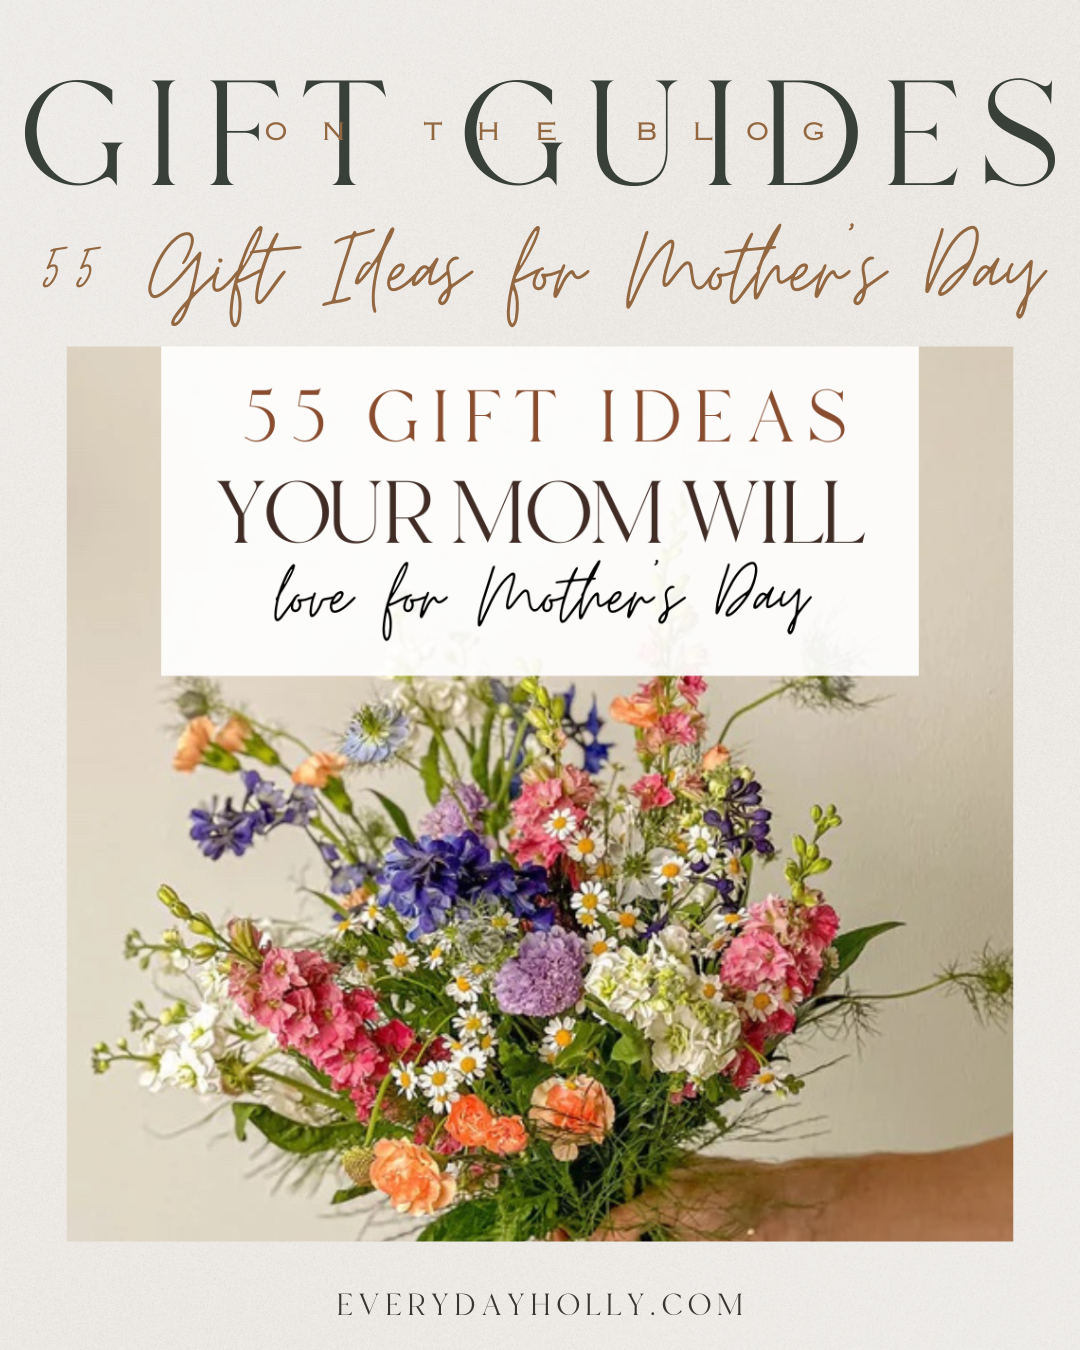 55 gift ideas your mom will love for mother's day | gift guide, gift ideas, mother's day, gifts for her, gifts for mom